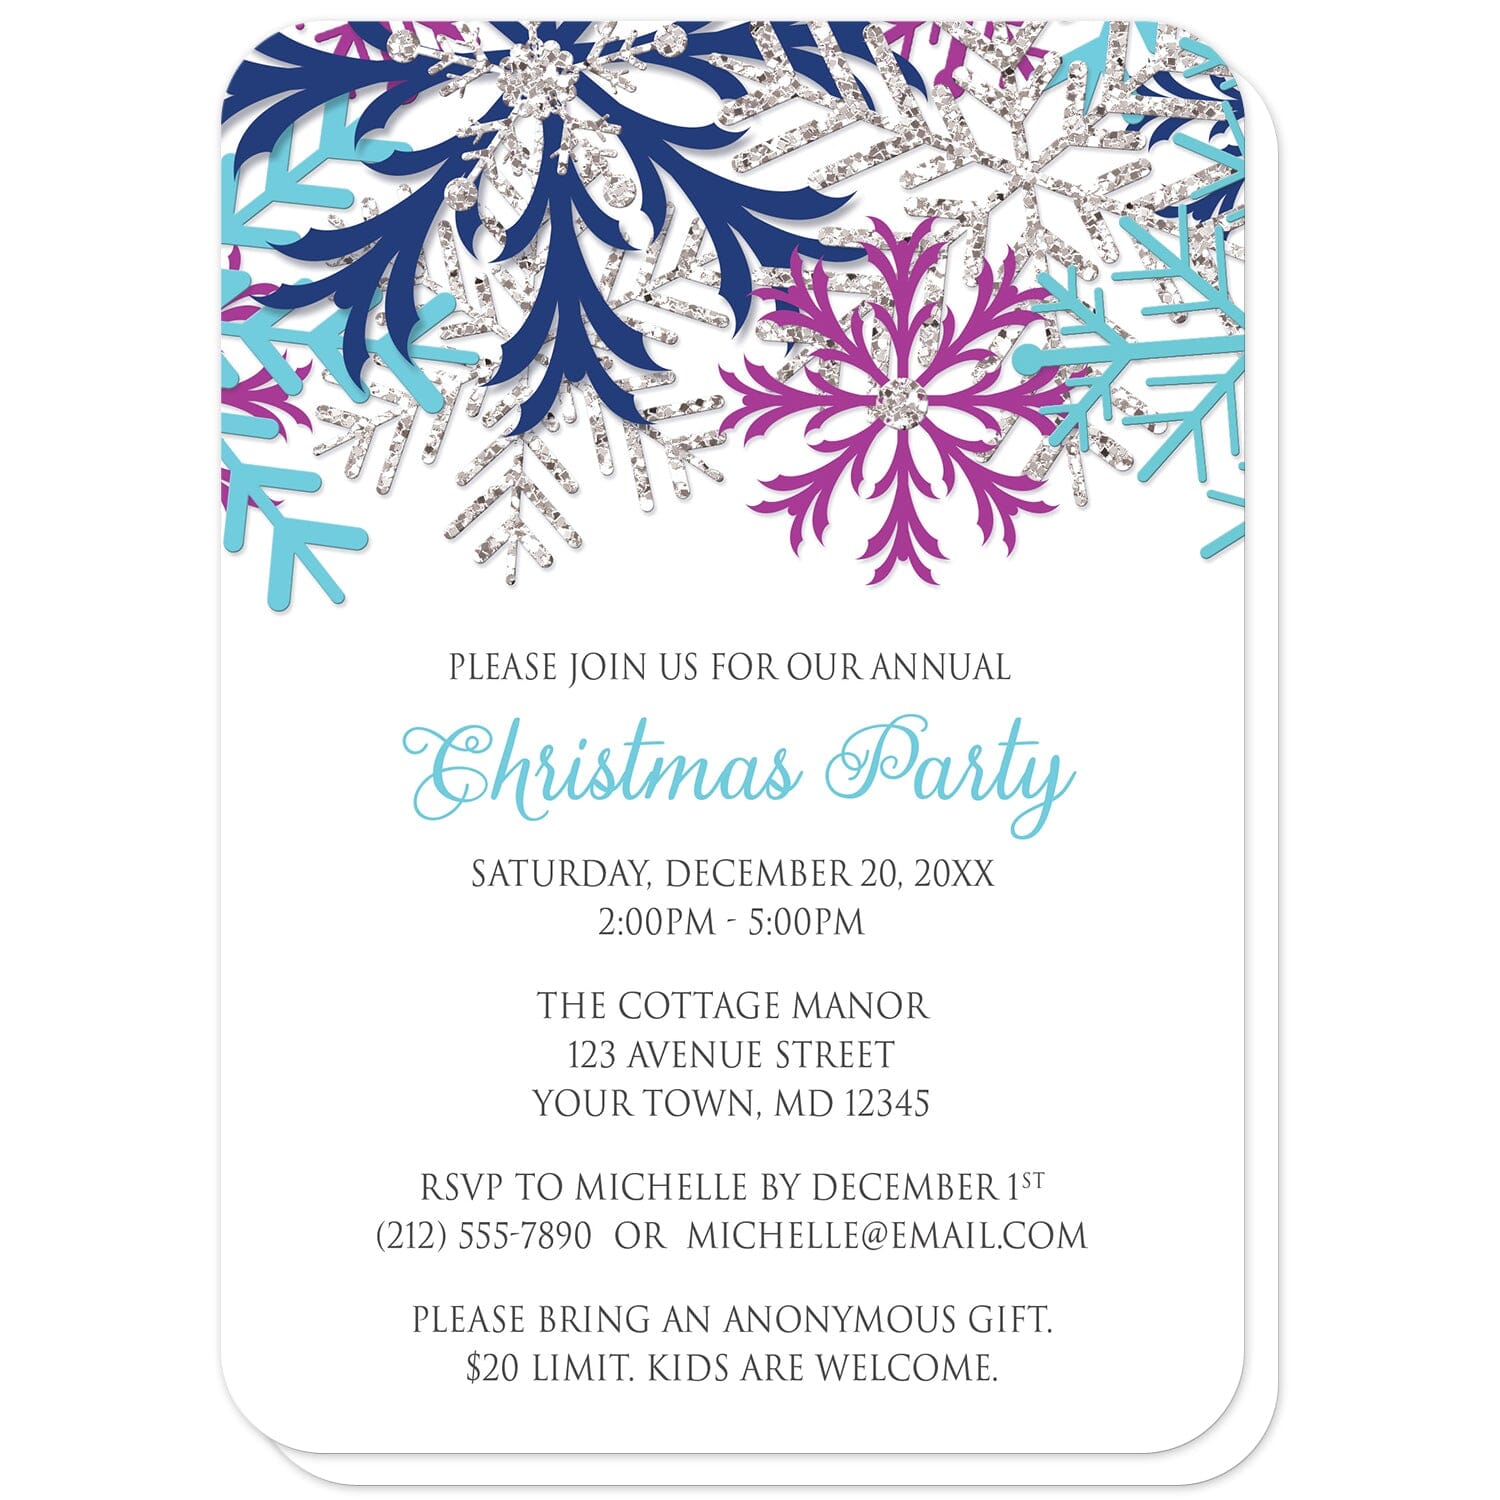 Turquoise Navy Orchid Silver Snowflake Christmas Invitations (with rounded corners) at Artistically Invited. Beautiful turquoise navy orchid silver snowflake Christmas invitations with turquoise blue, navy blue, orchid purple, and silver-colored glitter-illustrated snowflakes over a white background. Your personalized party details for your home or office party are custom printed in turquoise blue and gray over white below the pretty snowflakes. 